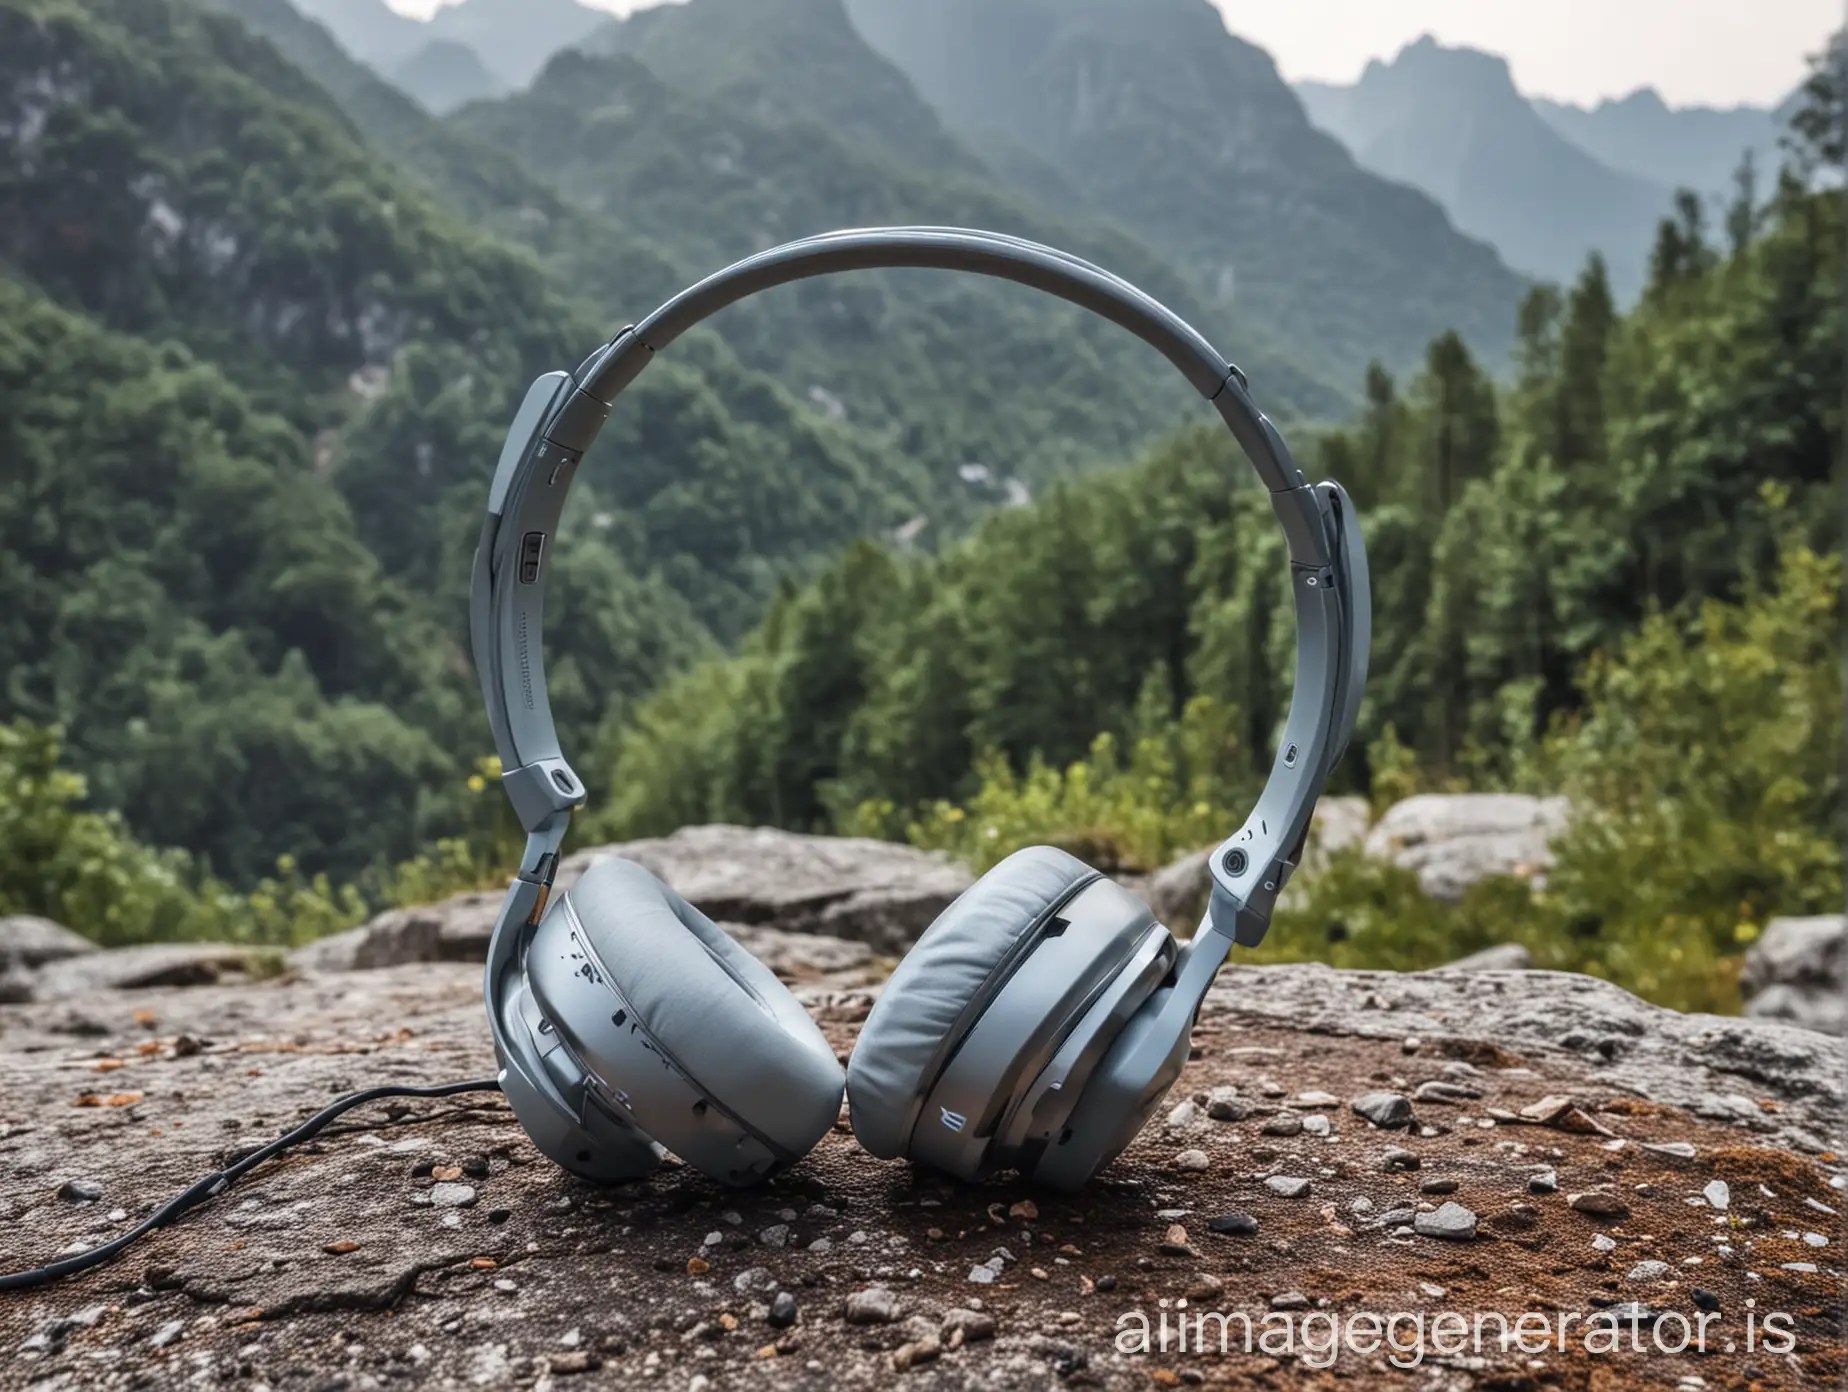 Huawei-Headphone-with-Mountain-Landscape-Background